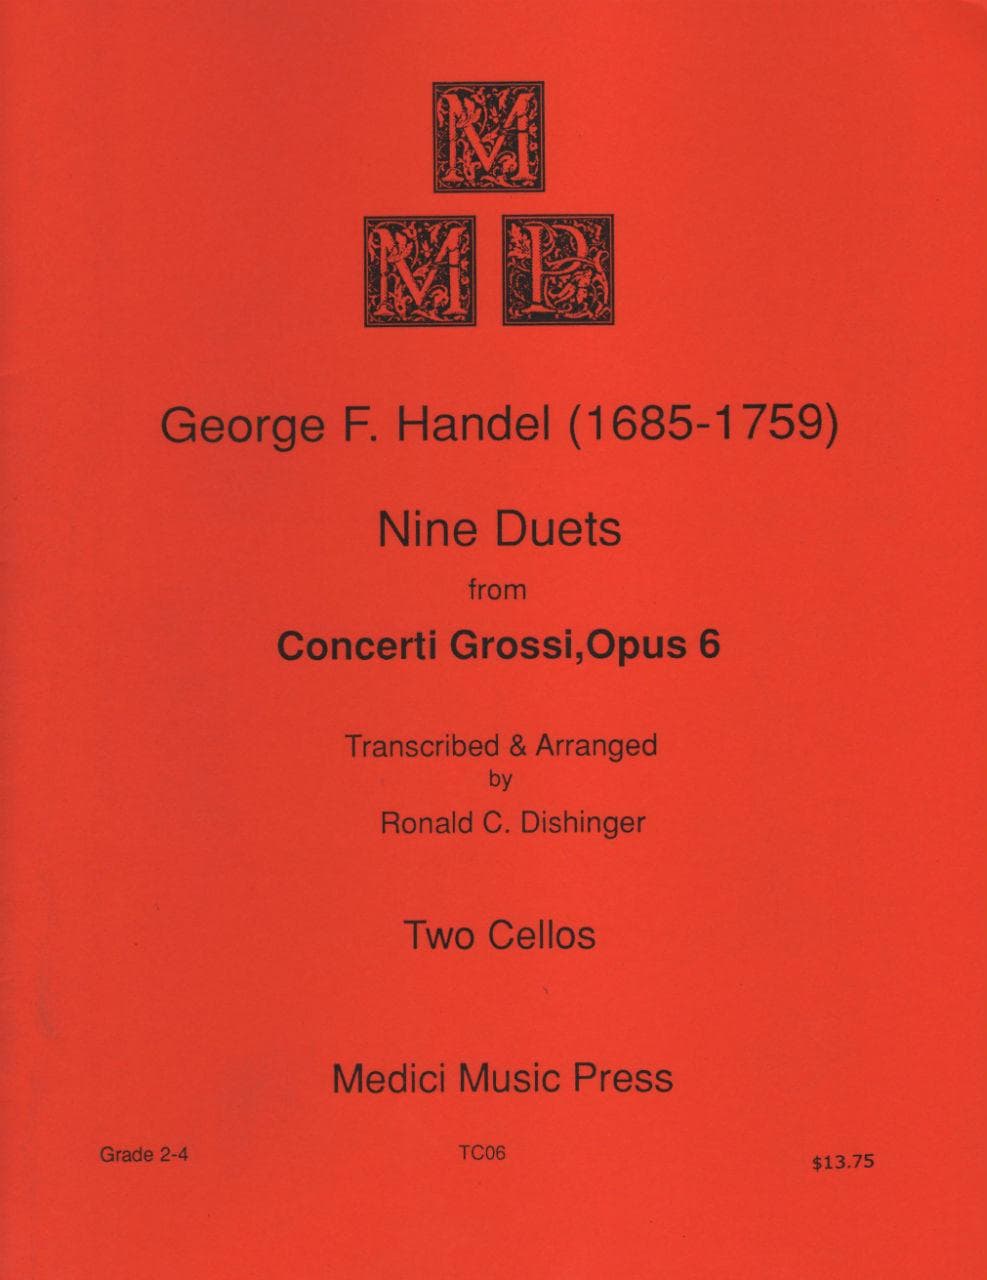 Handel, George Frideric - Nine Duets from Concerti Grossi, Op 6 - Two Cellos - arranged by Ronald C Dishinger - Medici Music Press